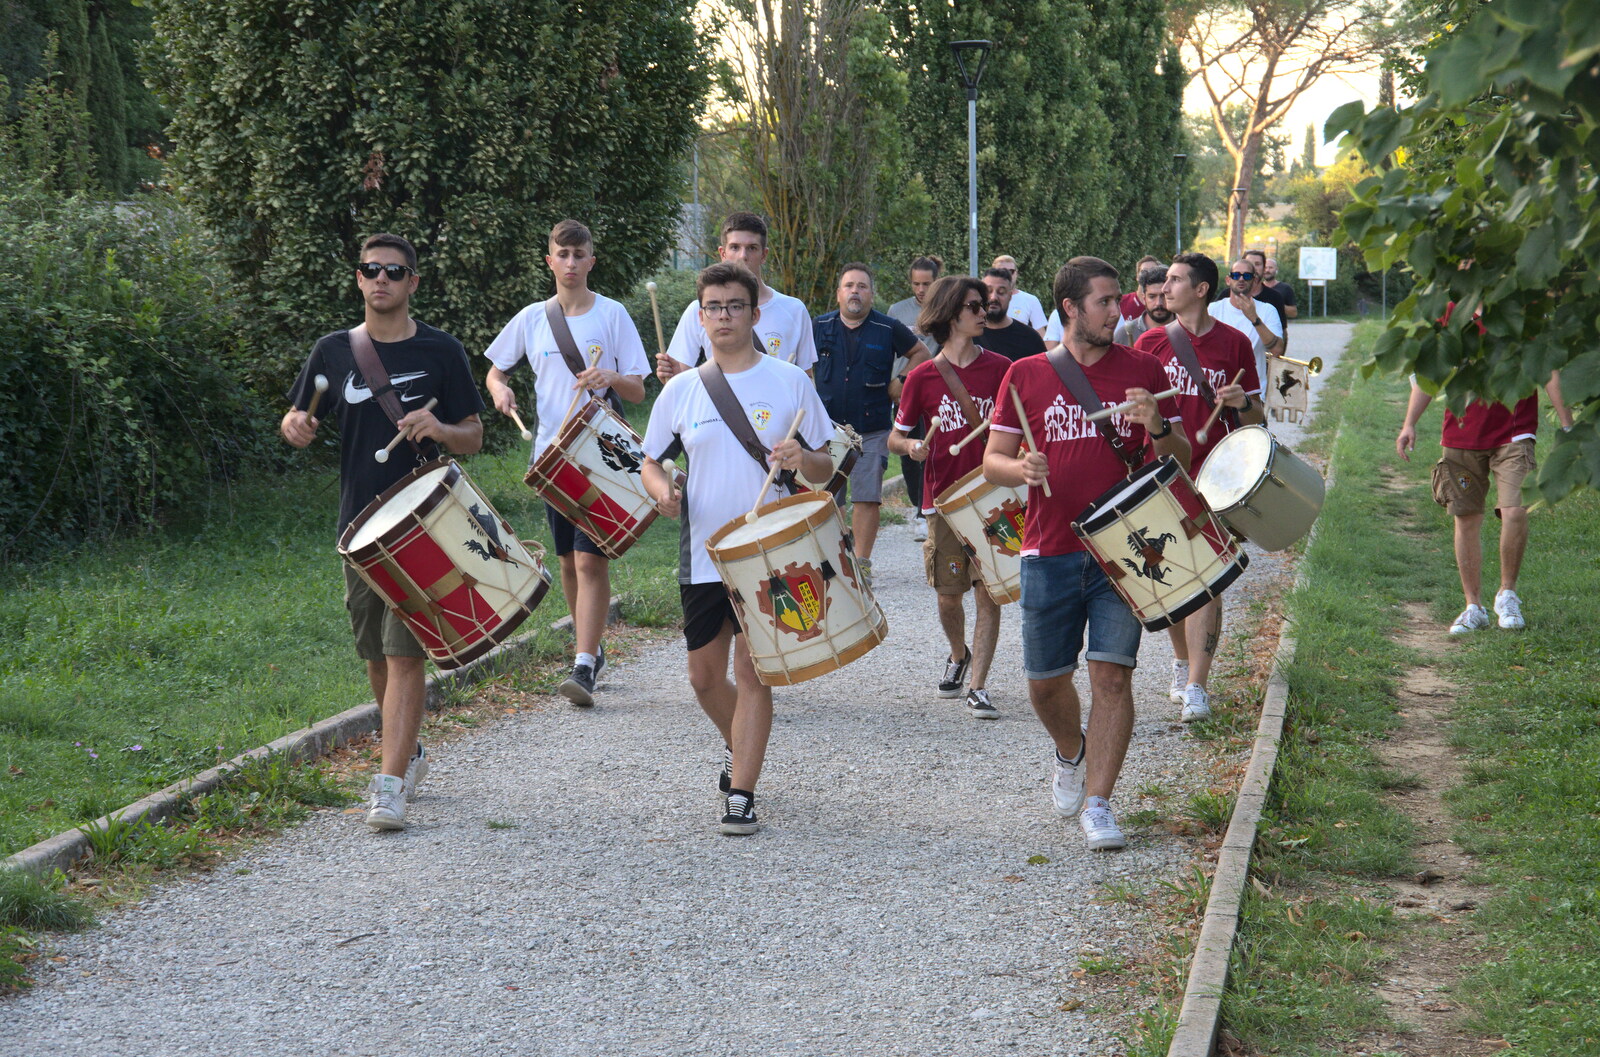 The Flags of Arezzo, Tuscany, Italy - 28th August 2022: The drummers do a circuit of the park